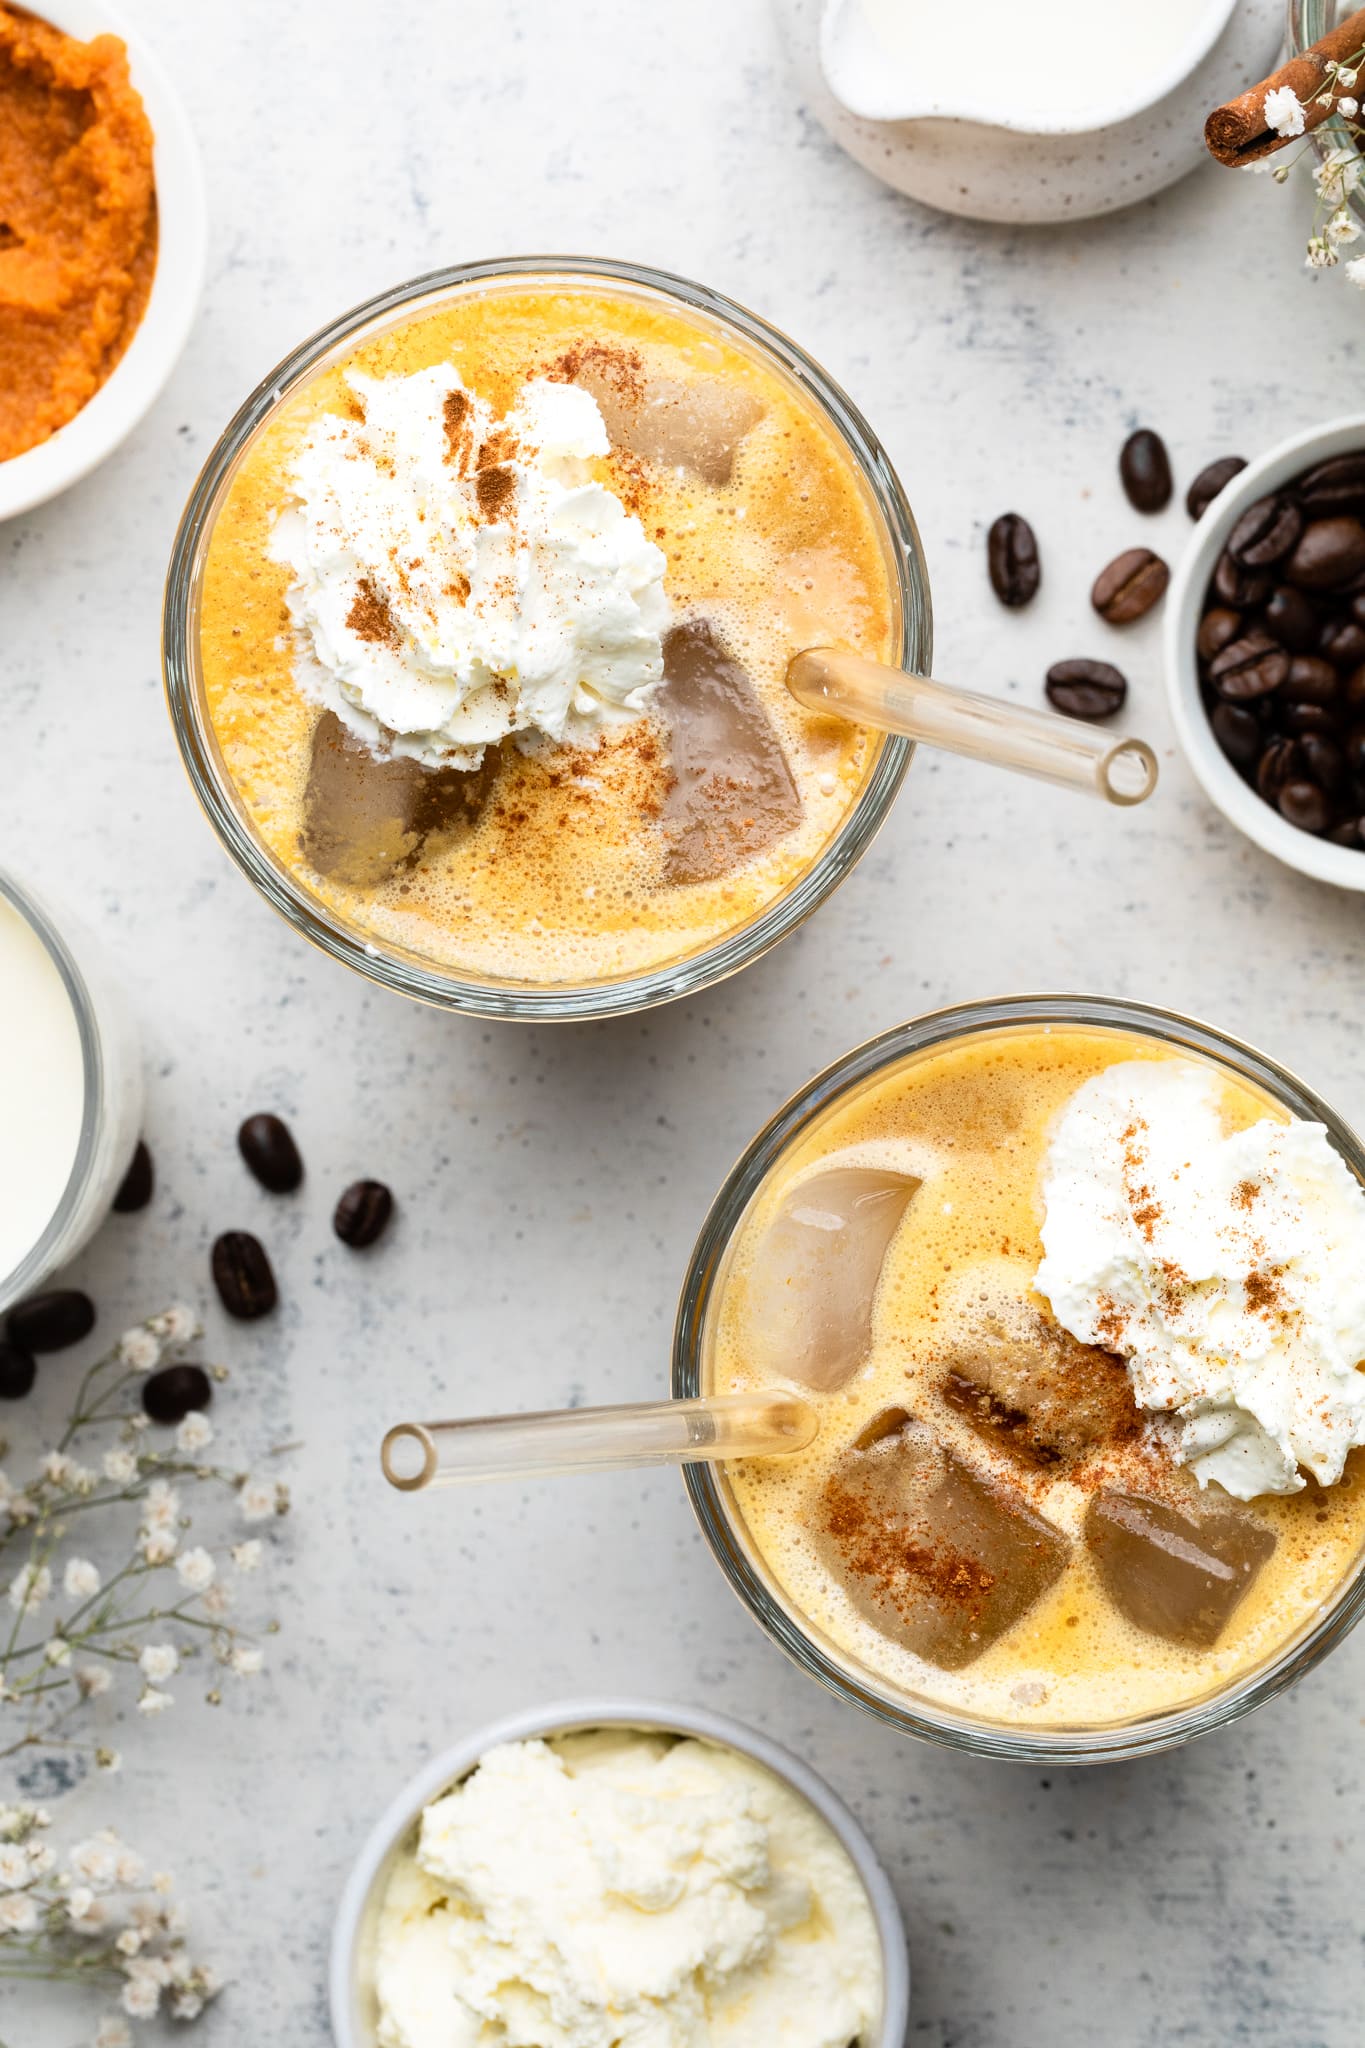 https://allthehealthythings.com/wp-content/uploads/2020/08/pumpkin-spice-cold-brew-6.jpg